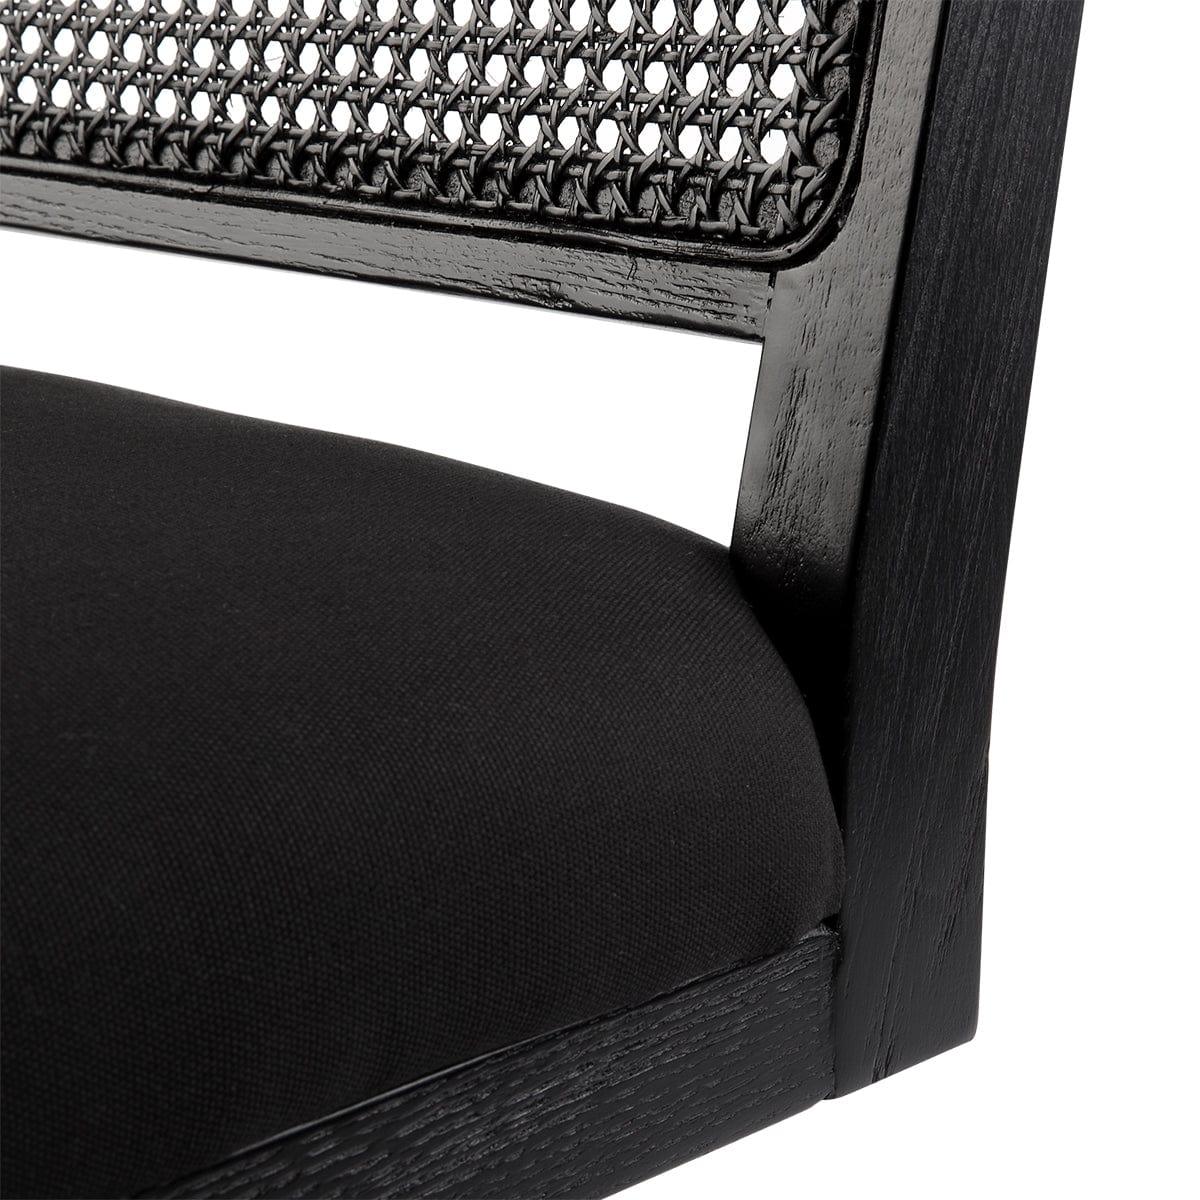 The Imperial Rattan Black Dining Chair - Black Linen.